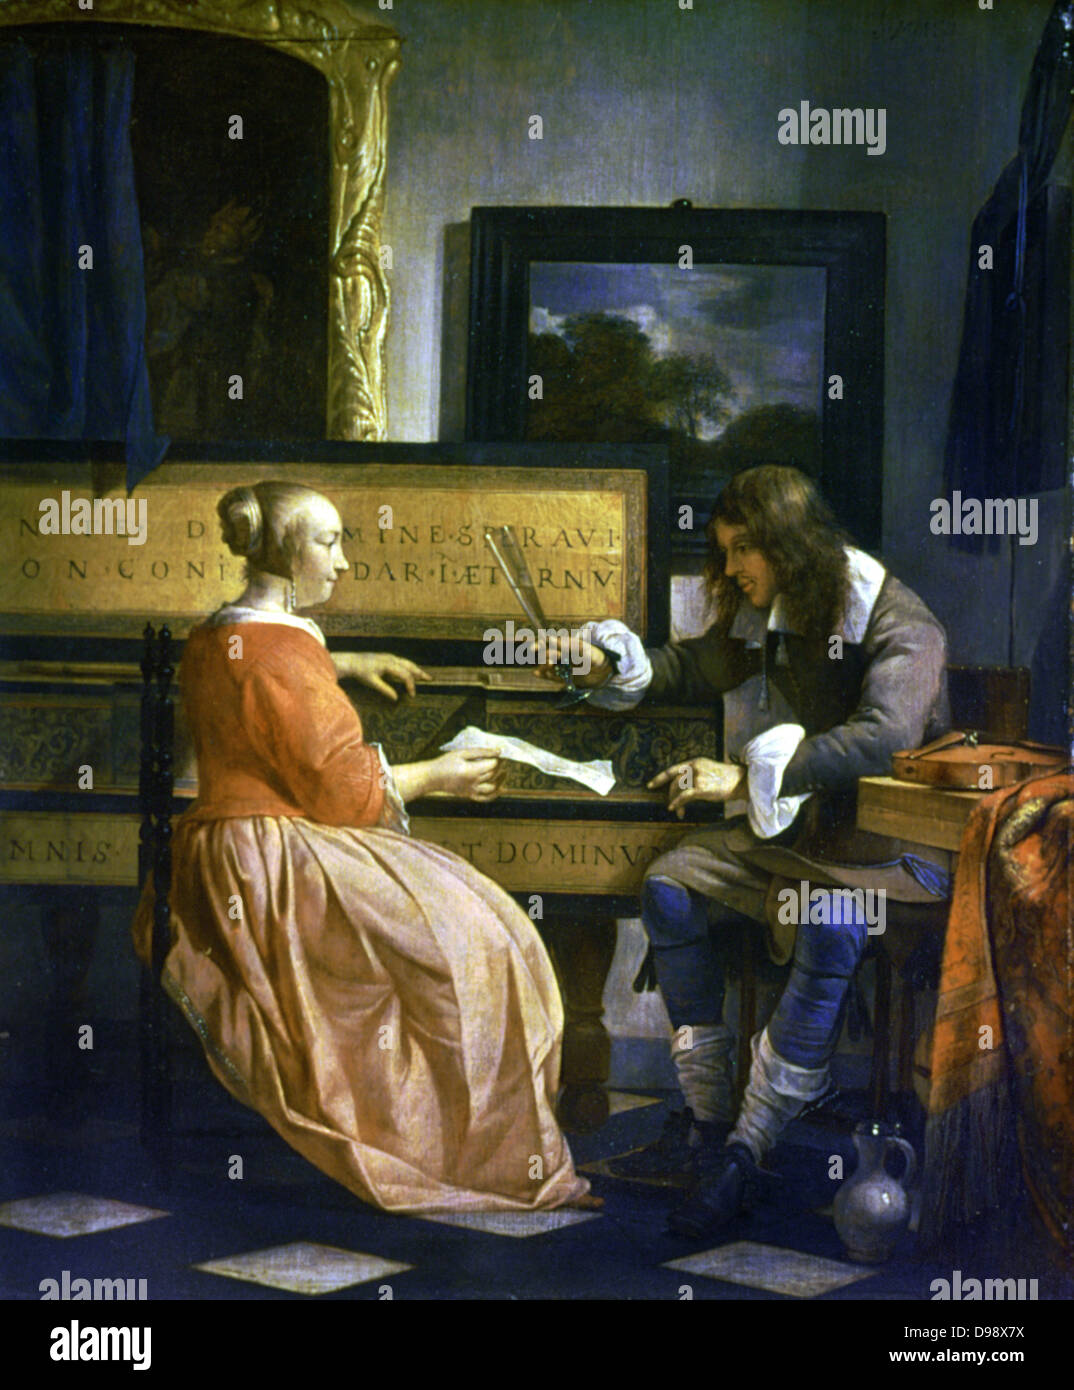 A Man and a Woman'. Gabriel Metsu (1629-1667) Dutch painter. Dutch interior with young man and woman by a virginal. He holds a glass in his hand. On table, right, is an instrument of the violin family. Stock Photo